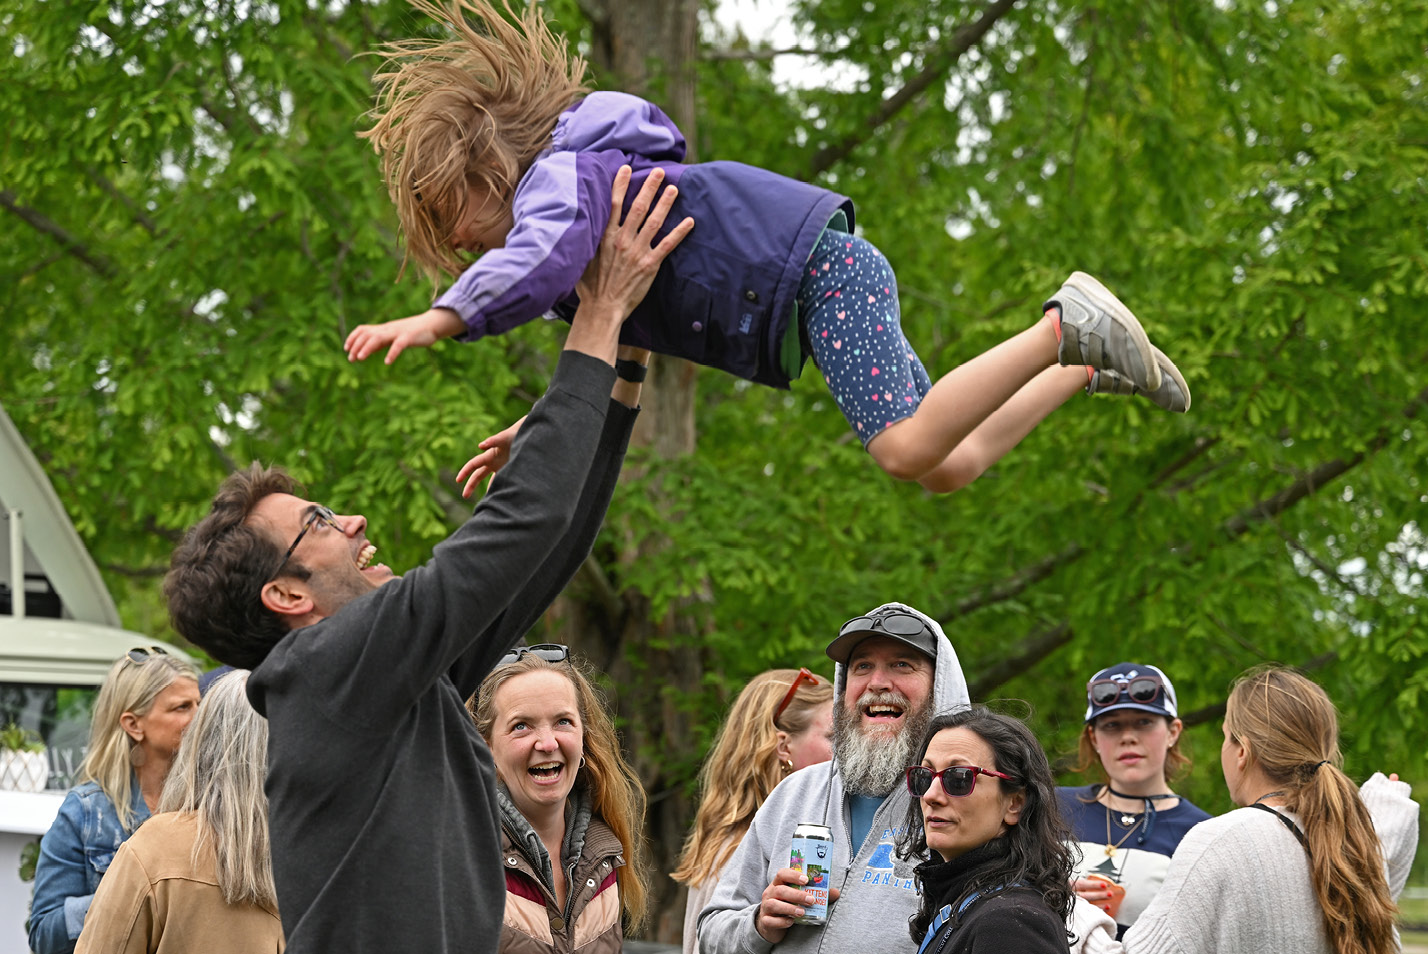 A happy alum parent tosses their child in the air during Reunion.